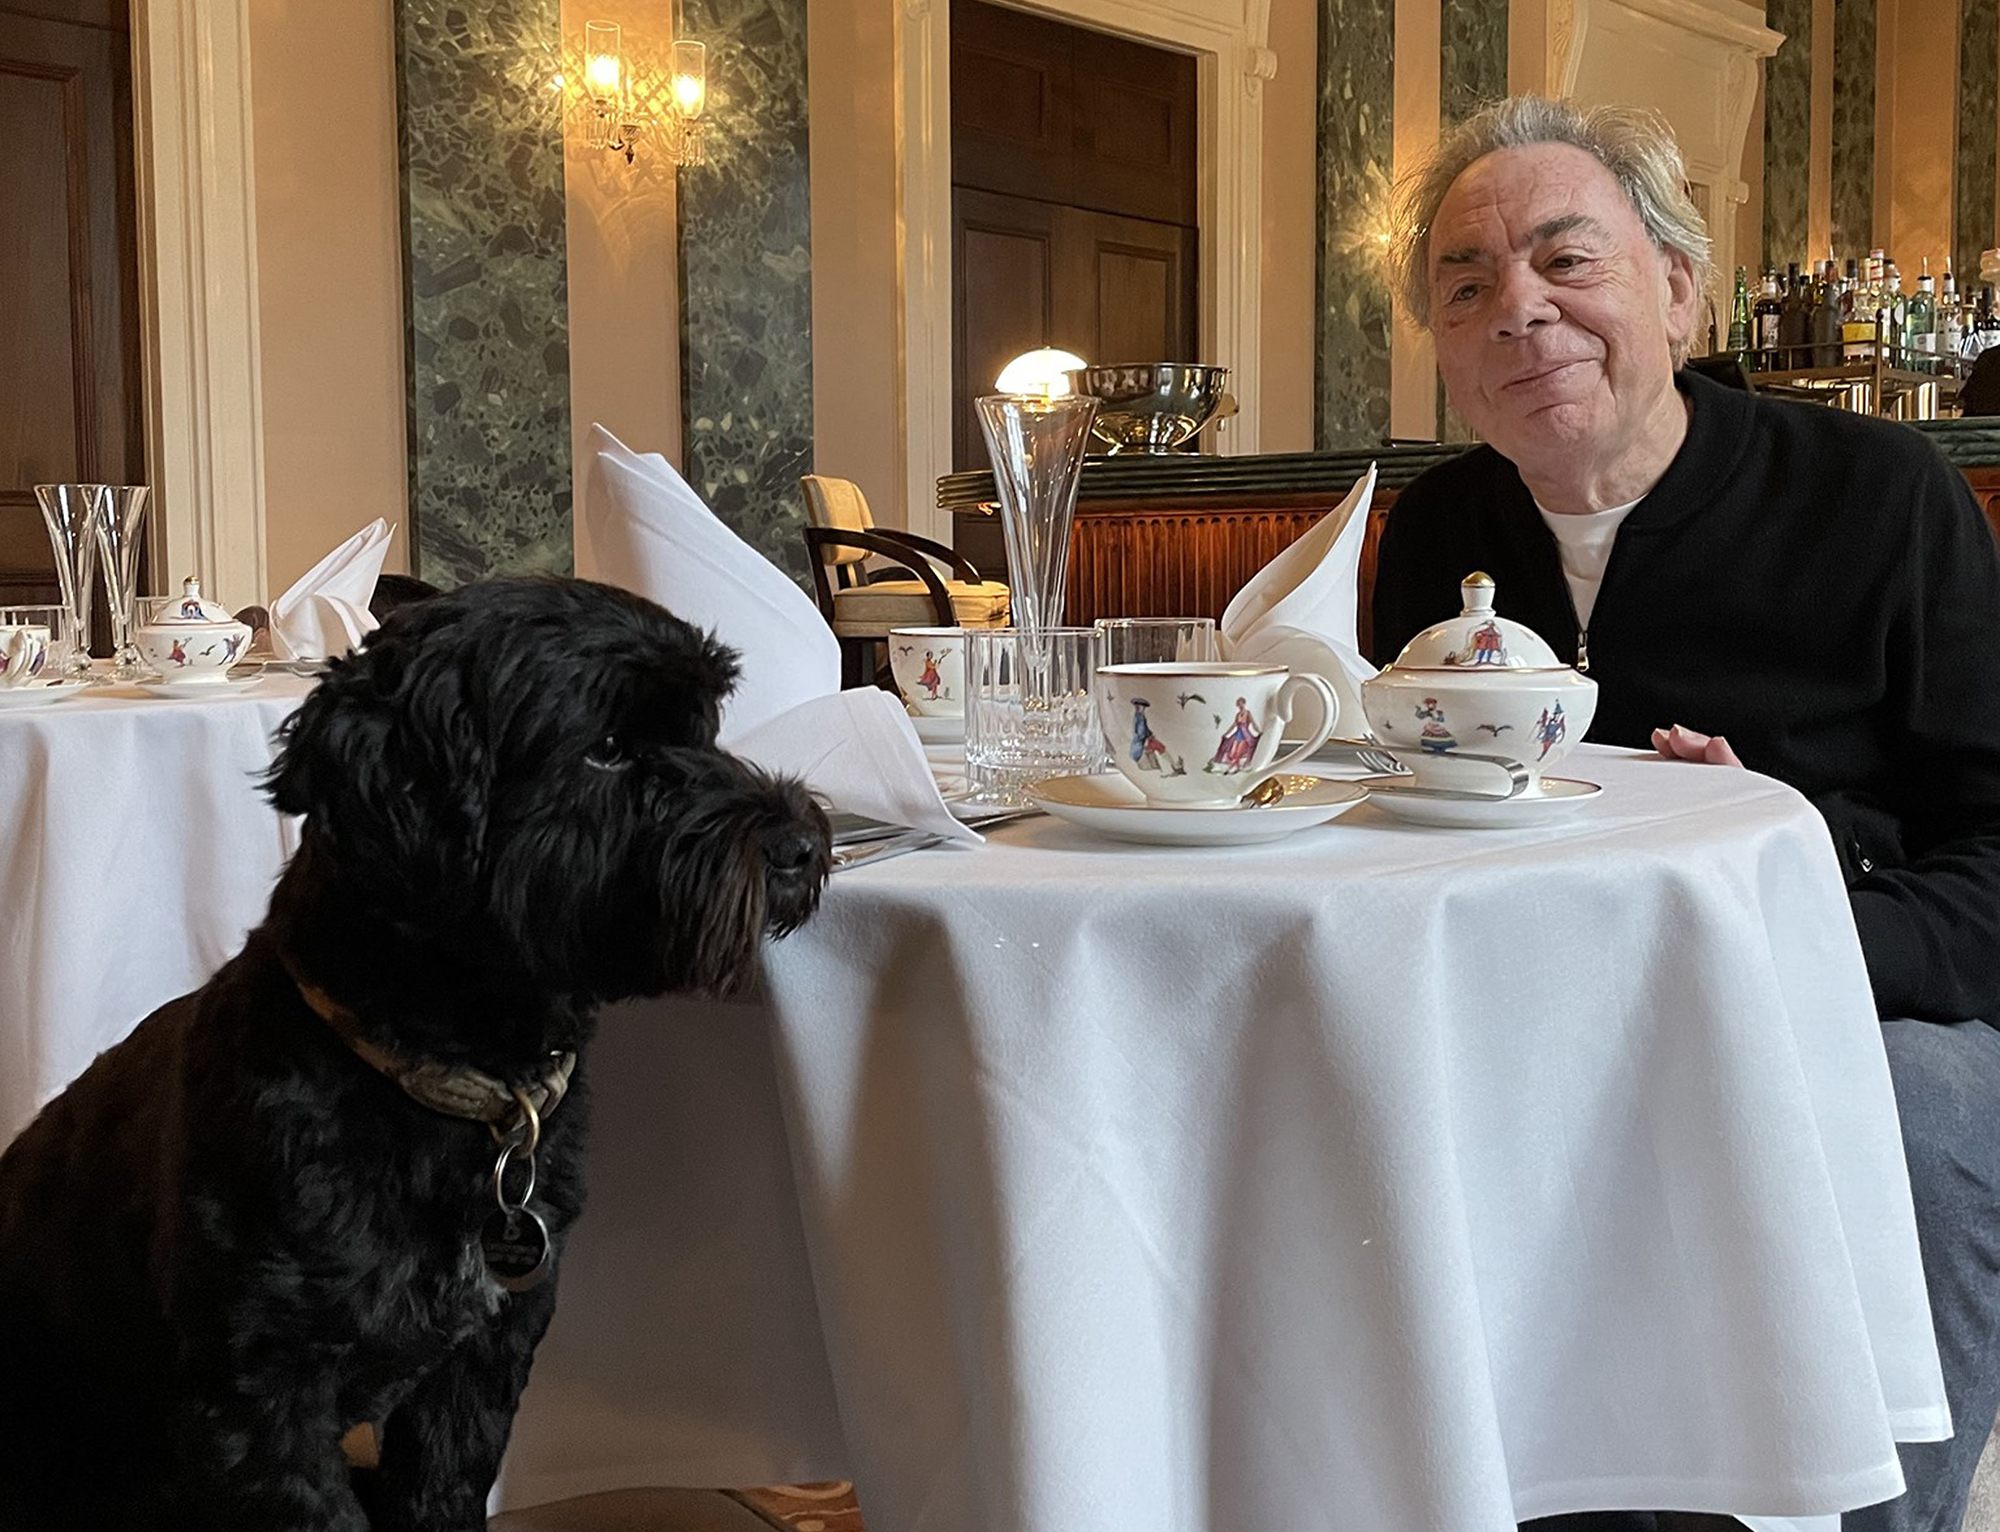 Andrew having afternoon tea with his dog, Mojito